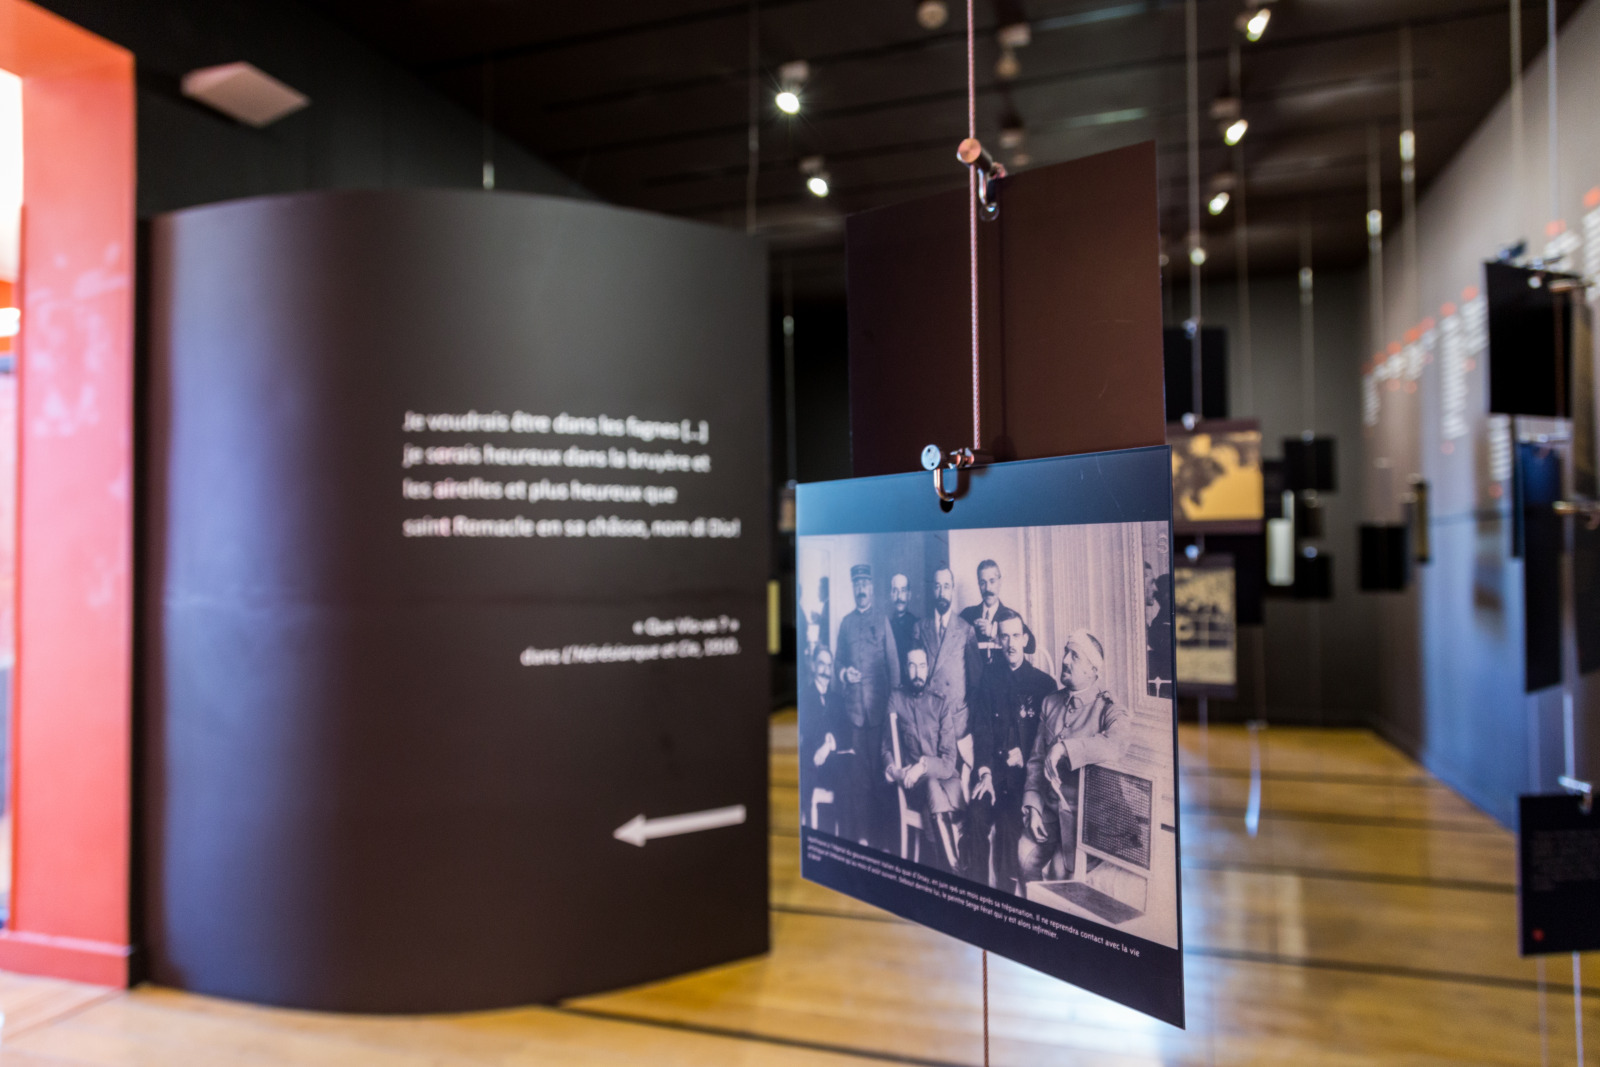 Exhibition room with texts by Guillaume Apollinaire and photos